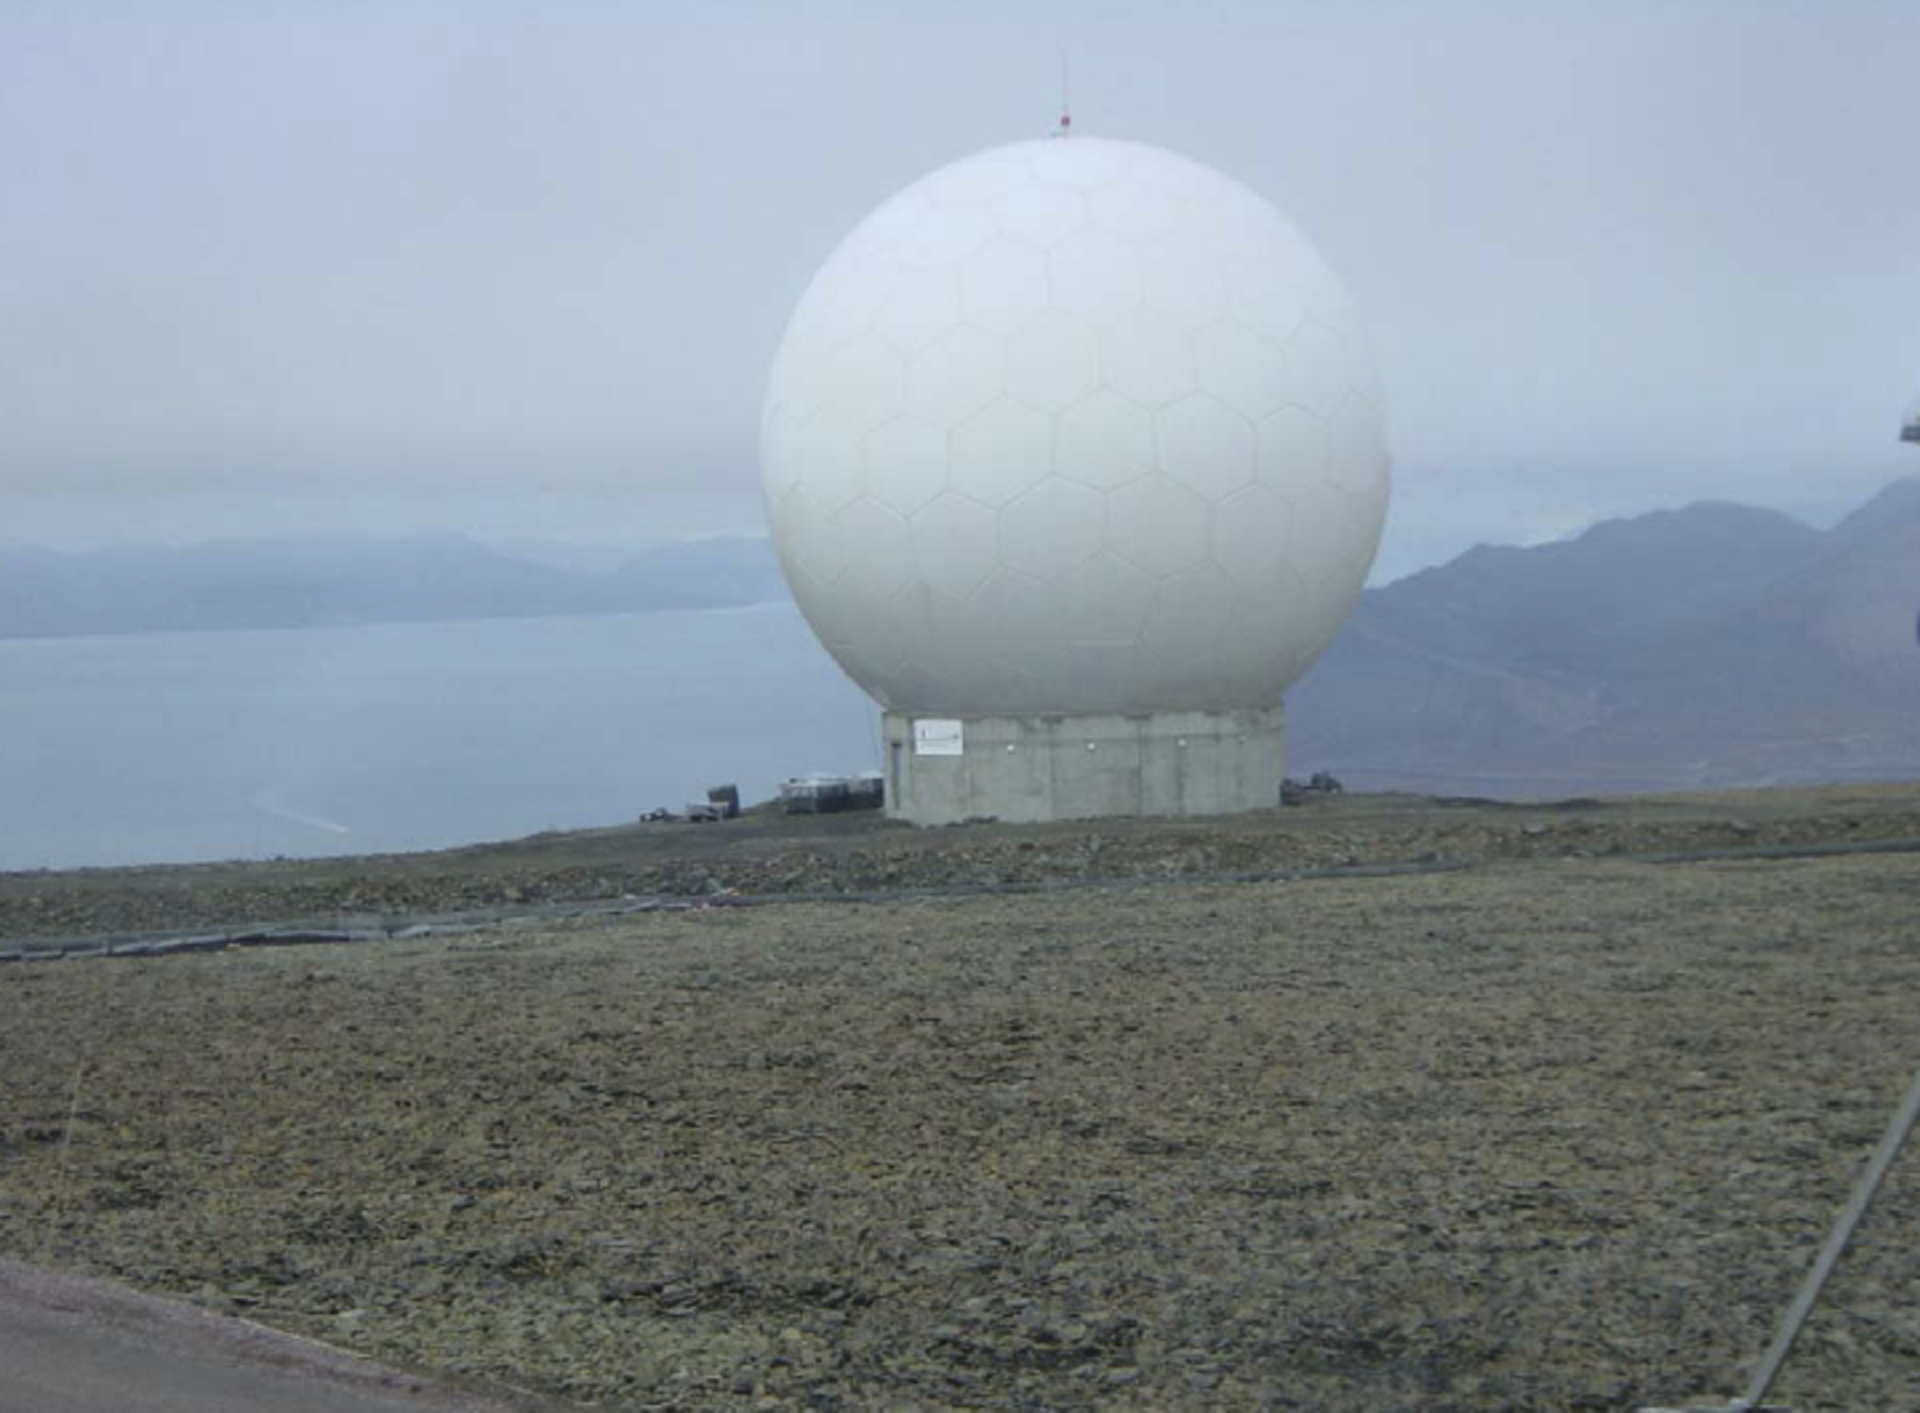 Svalbard station's SG-3 antenna terminal: waiting for GOCE